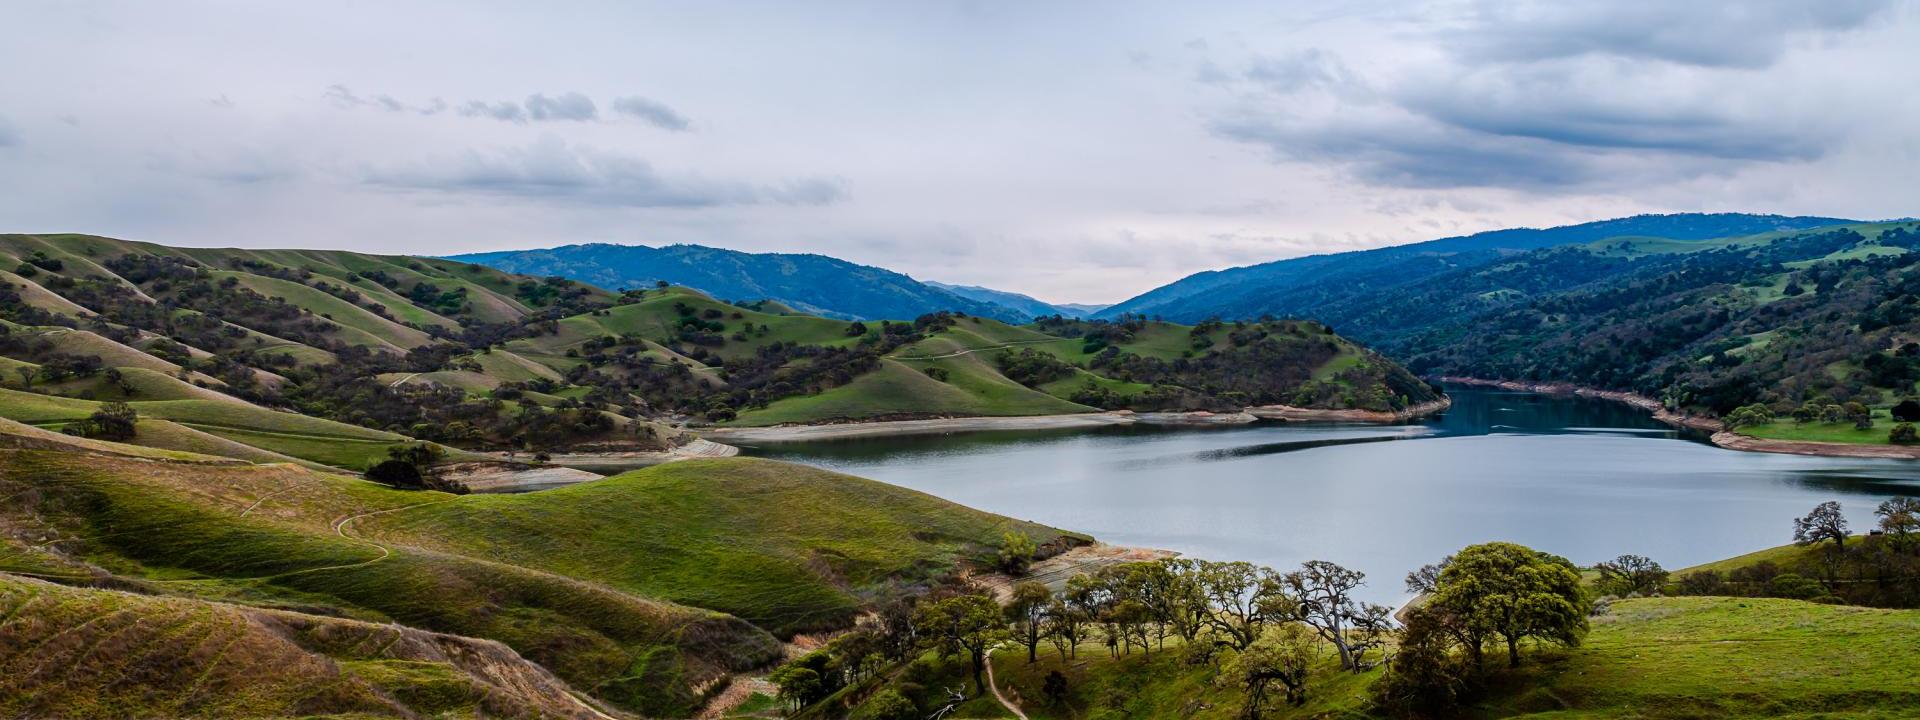 Del Valle Lake surrounded by green hills and gray sky